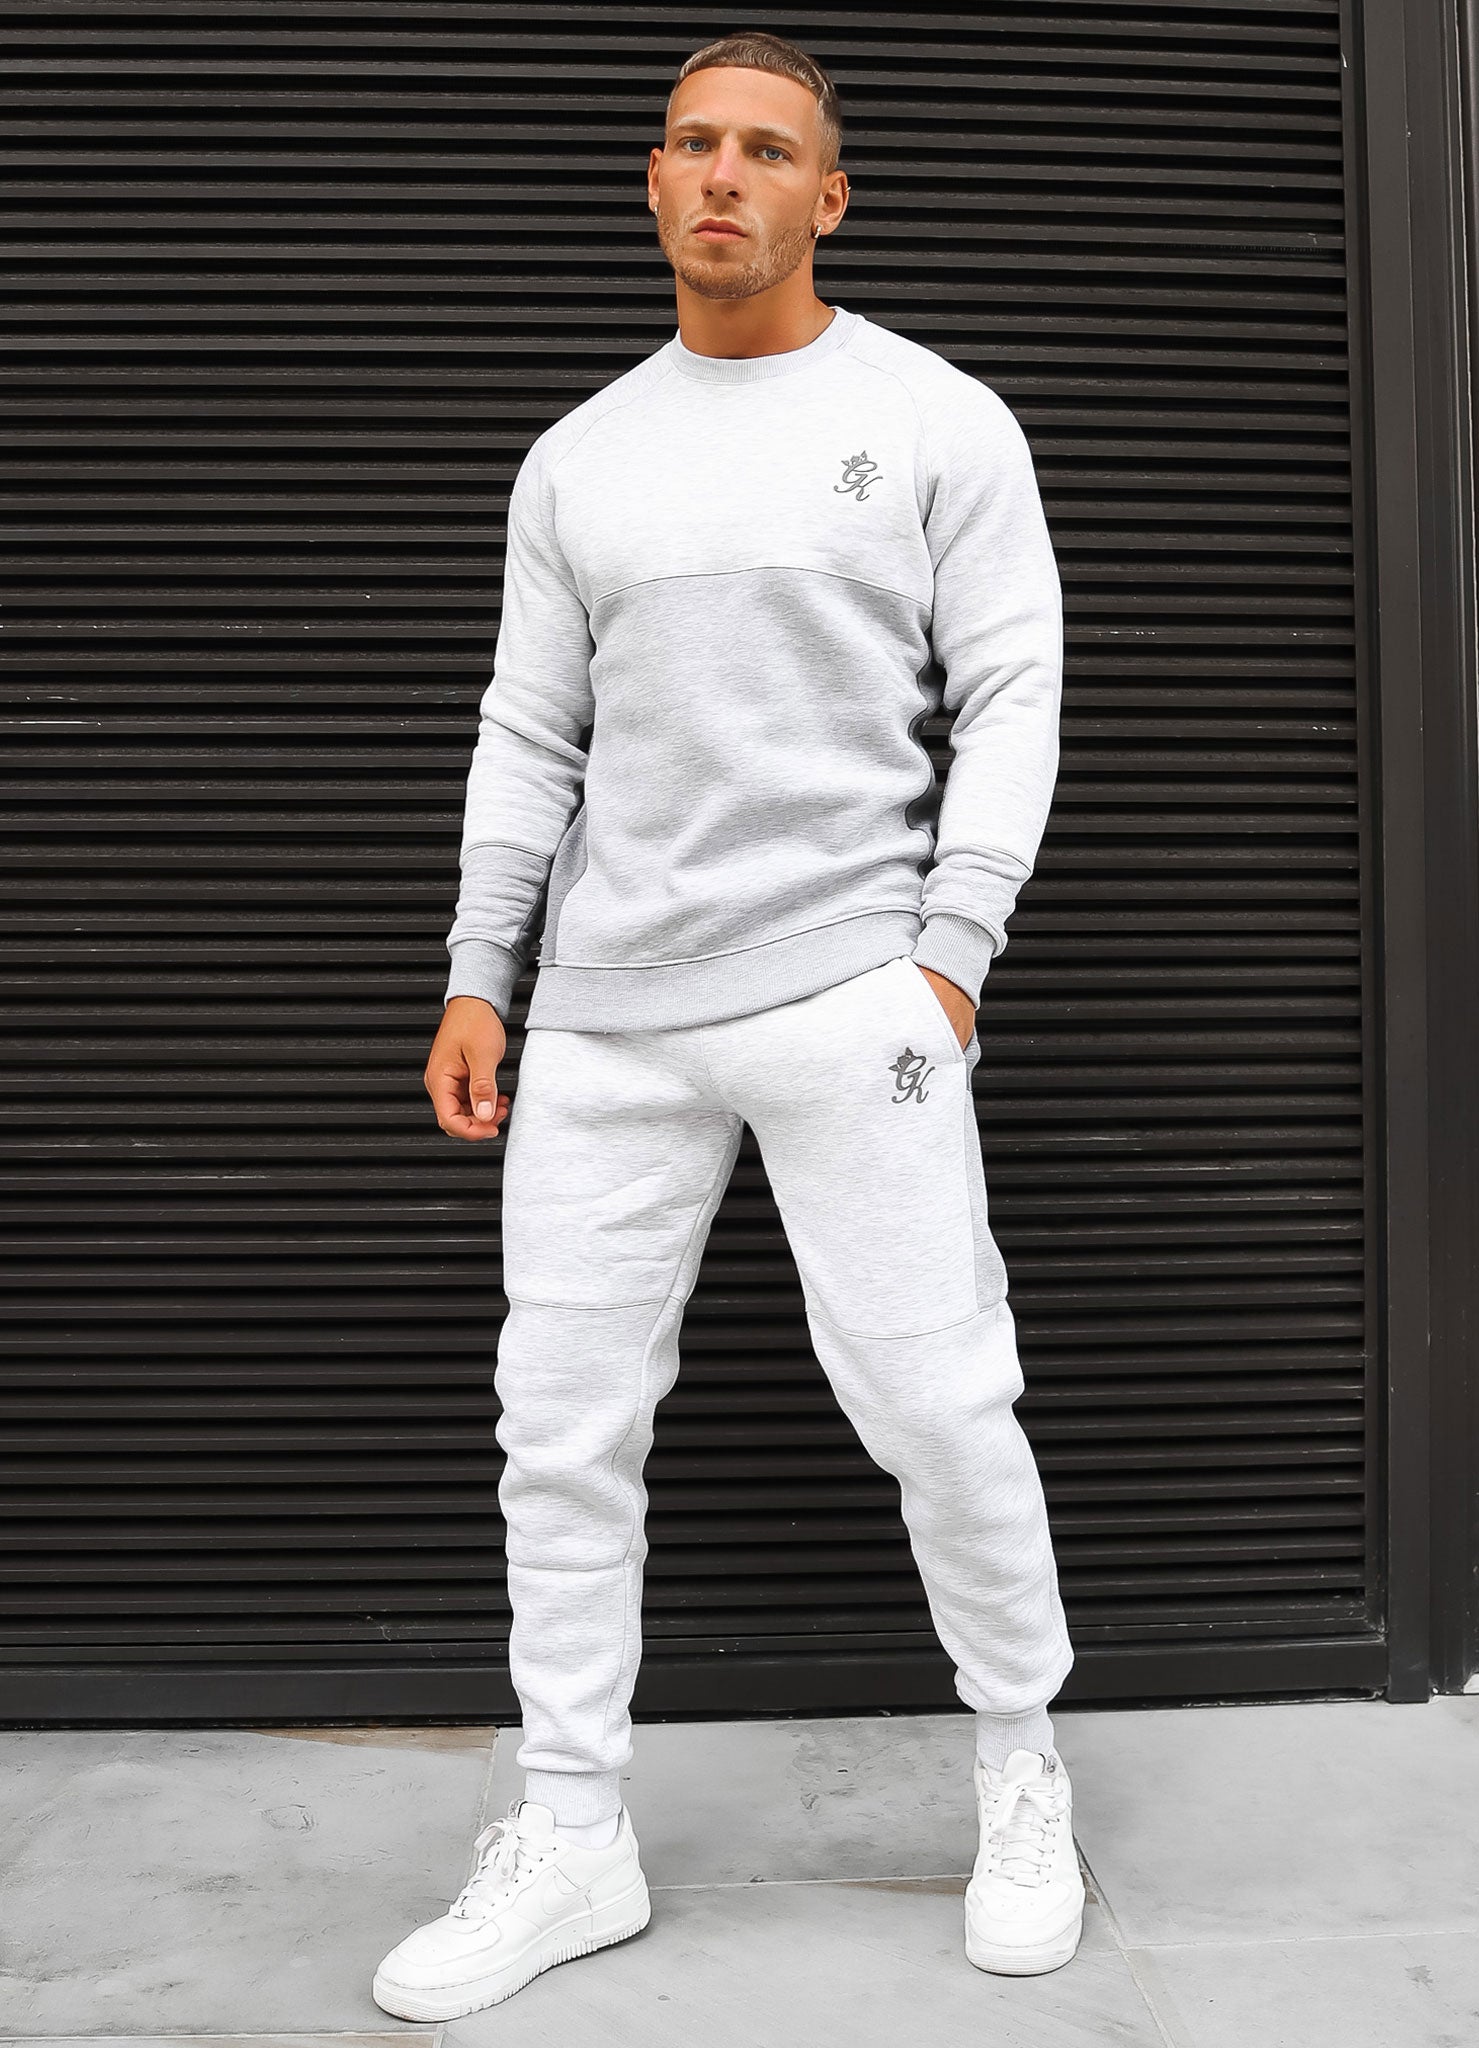 Shop tracksuit bottoms | Gym King – Page 2 – GYM KING